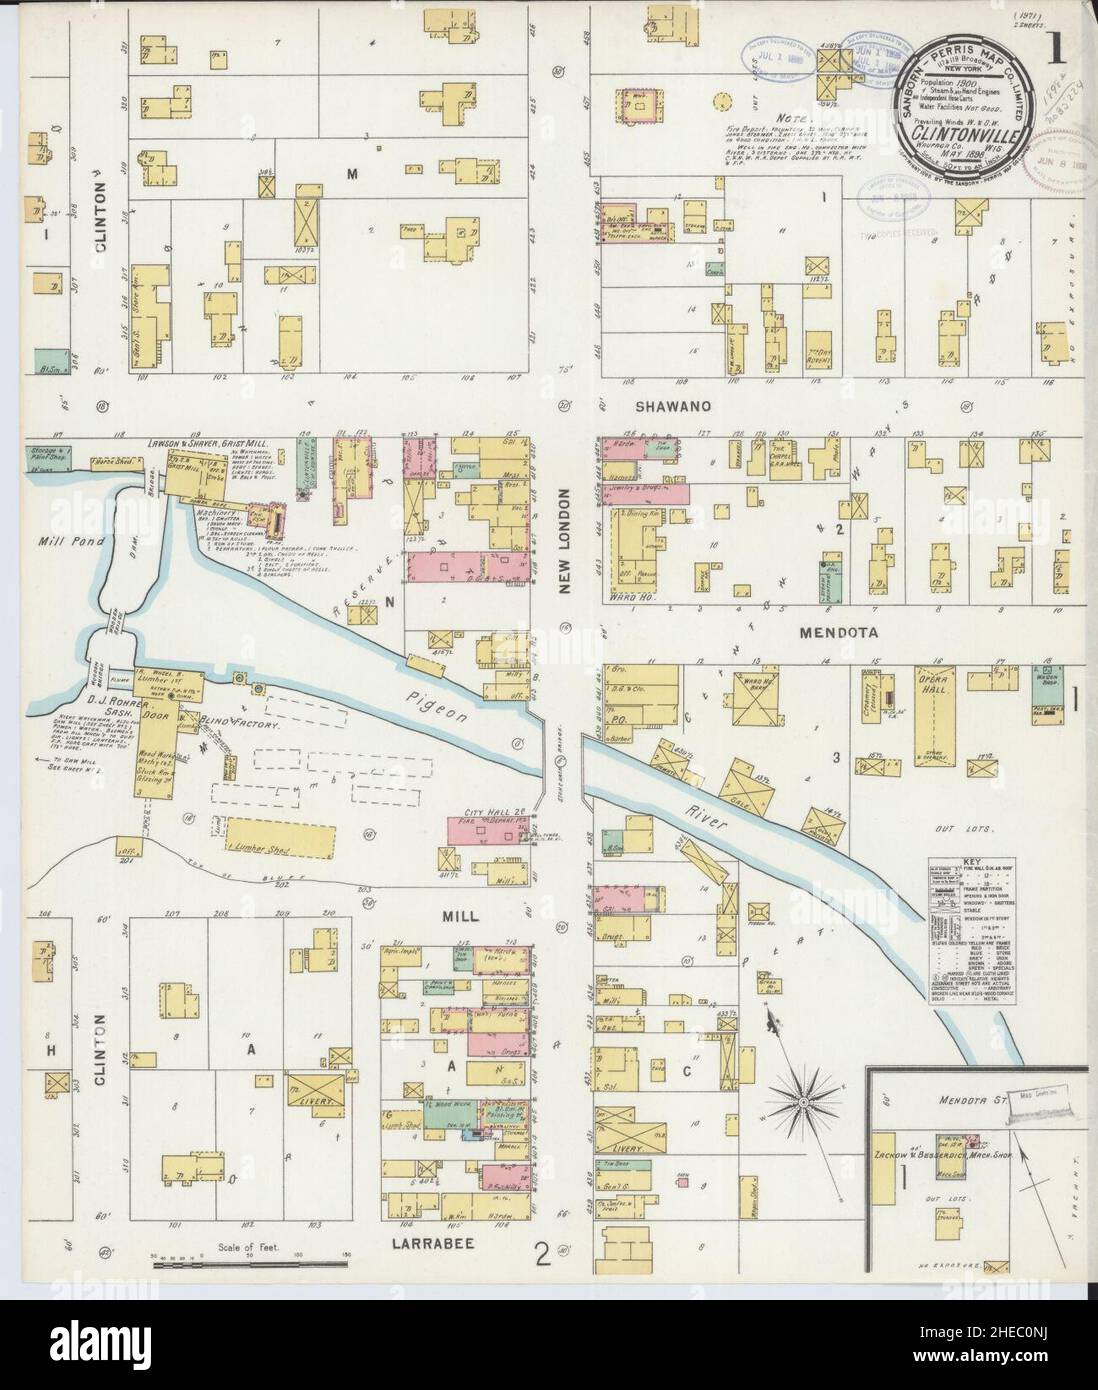 Sanborn Fire Insurance Map from Clintonville, Waupaca County, Wisconsin. Stock Photo